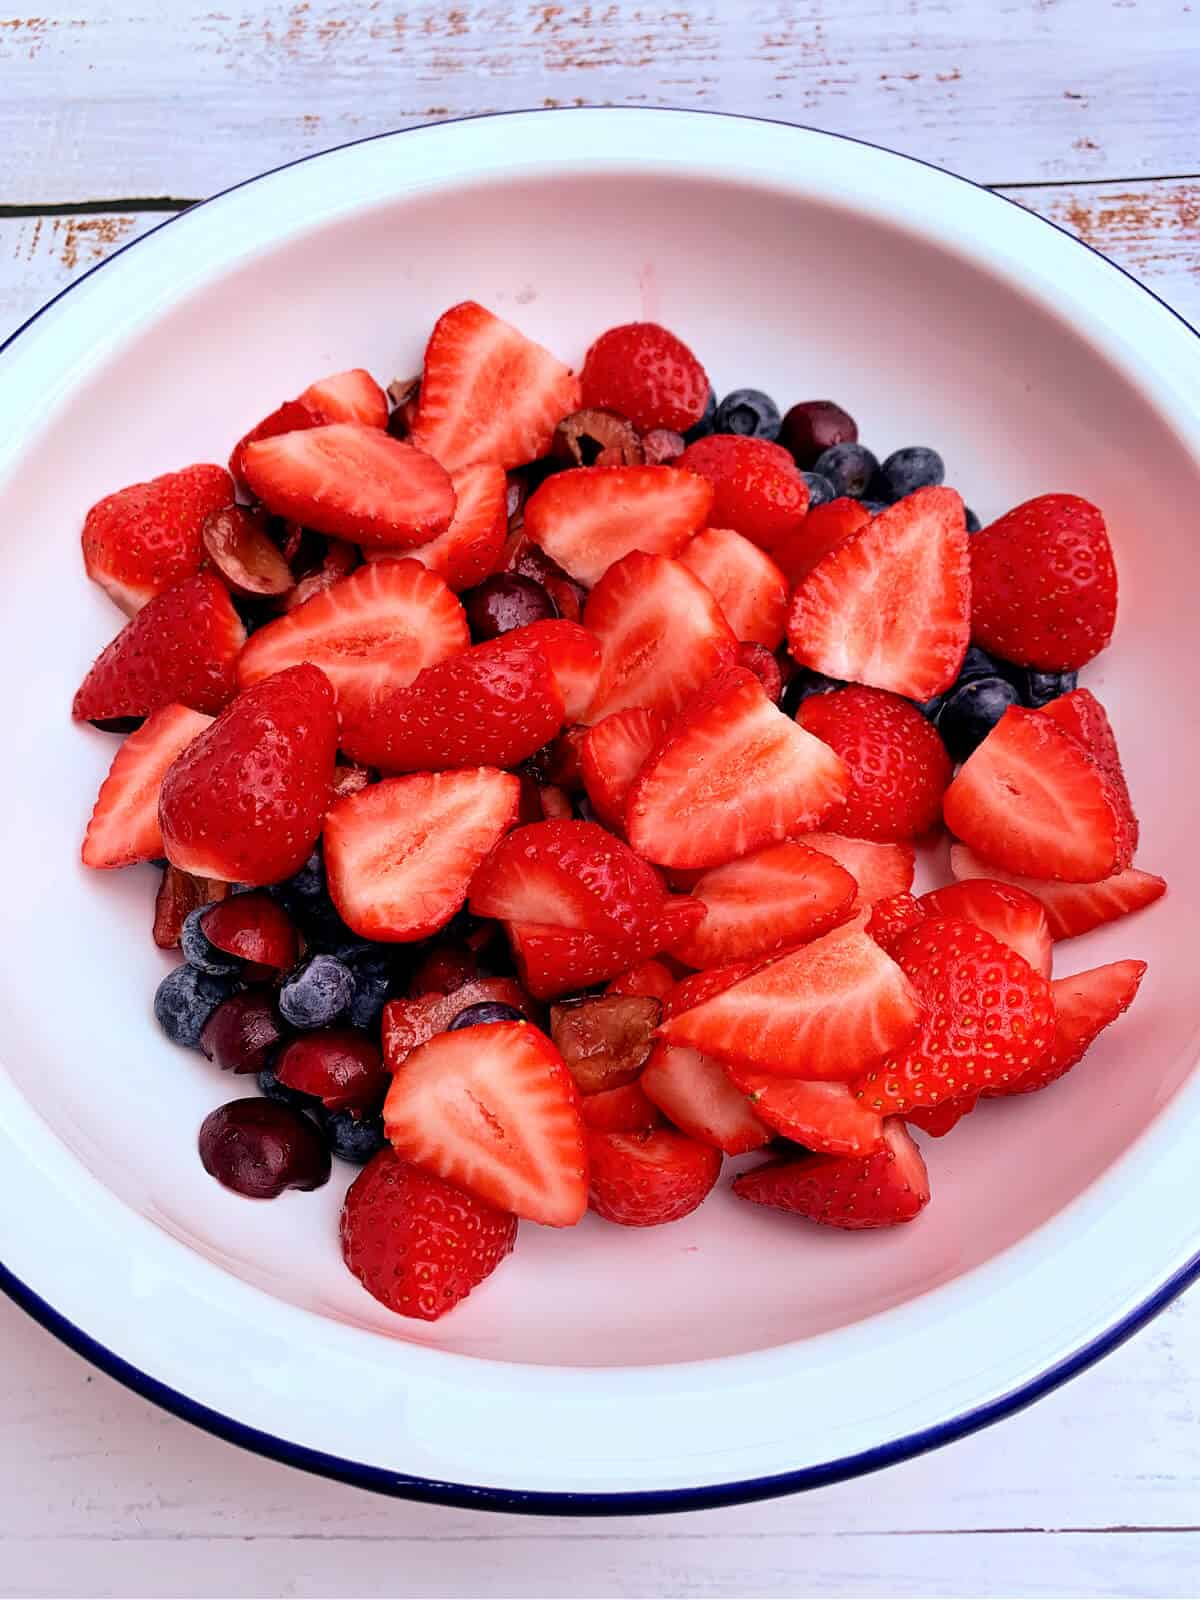 Round white enamel bowl filled with sliced strawberries, cherries and blueberries.